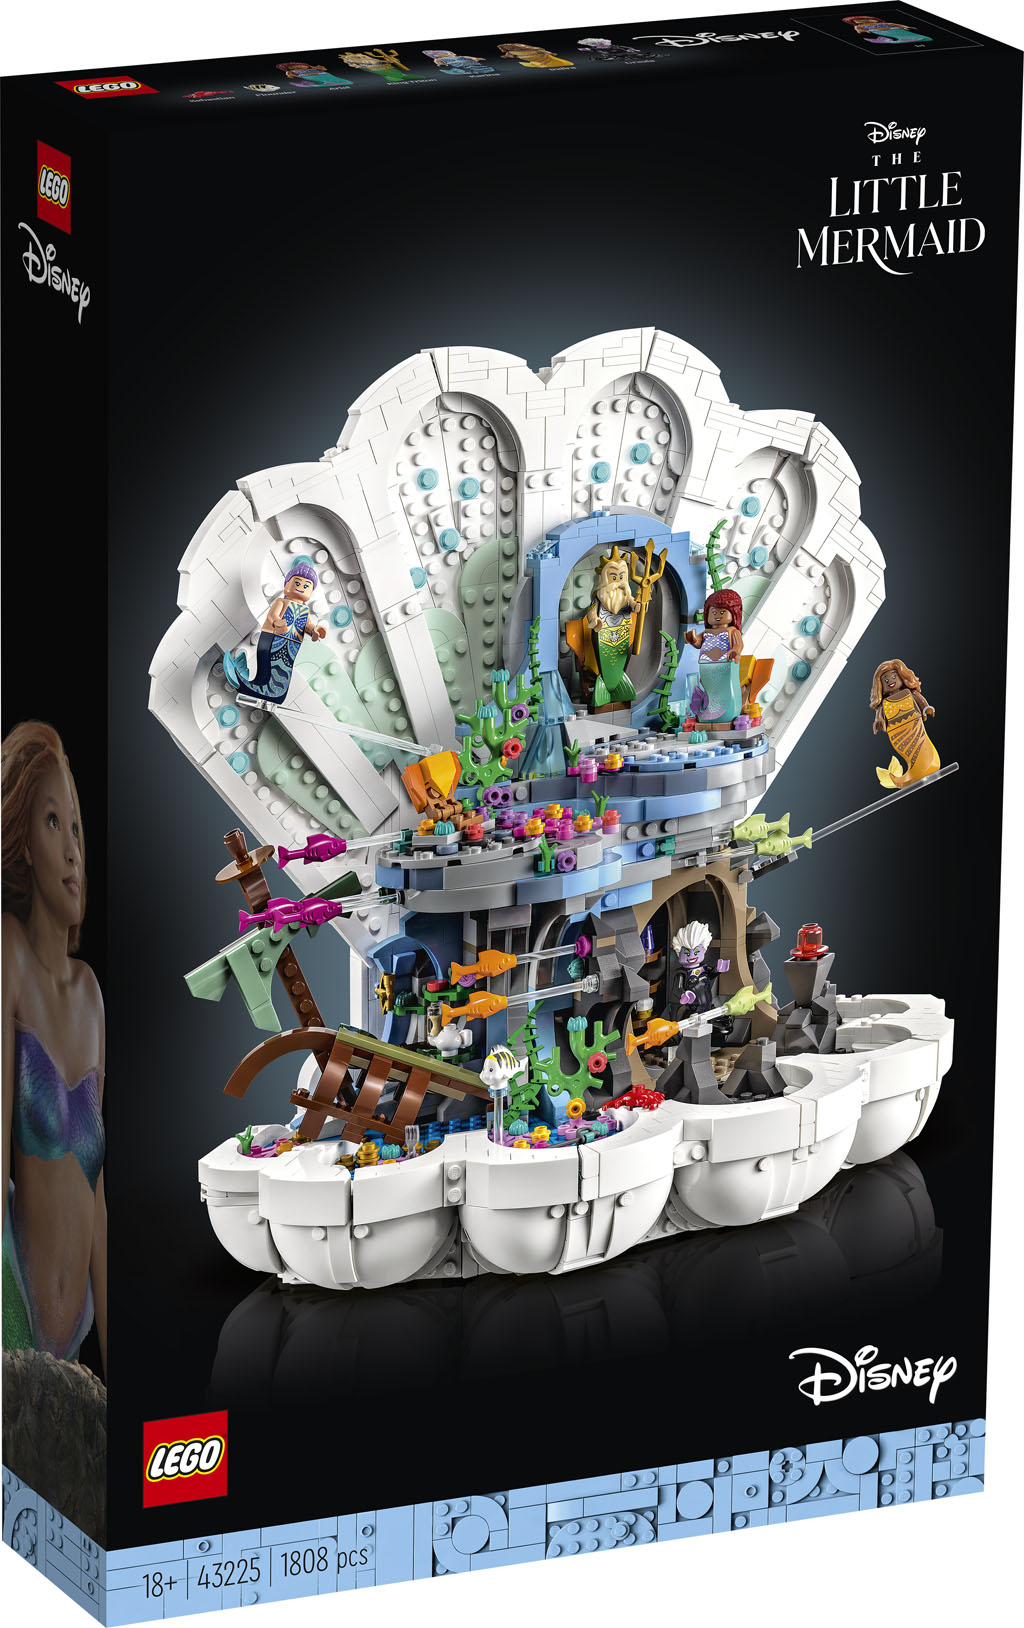 Three LEGO Disney The Little Mermaid Sets Officially Announced! The